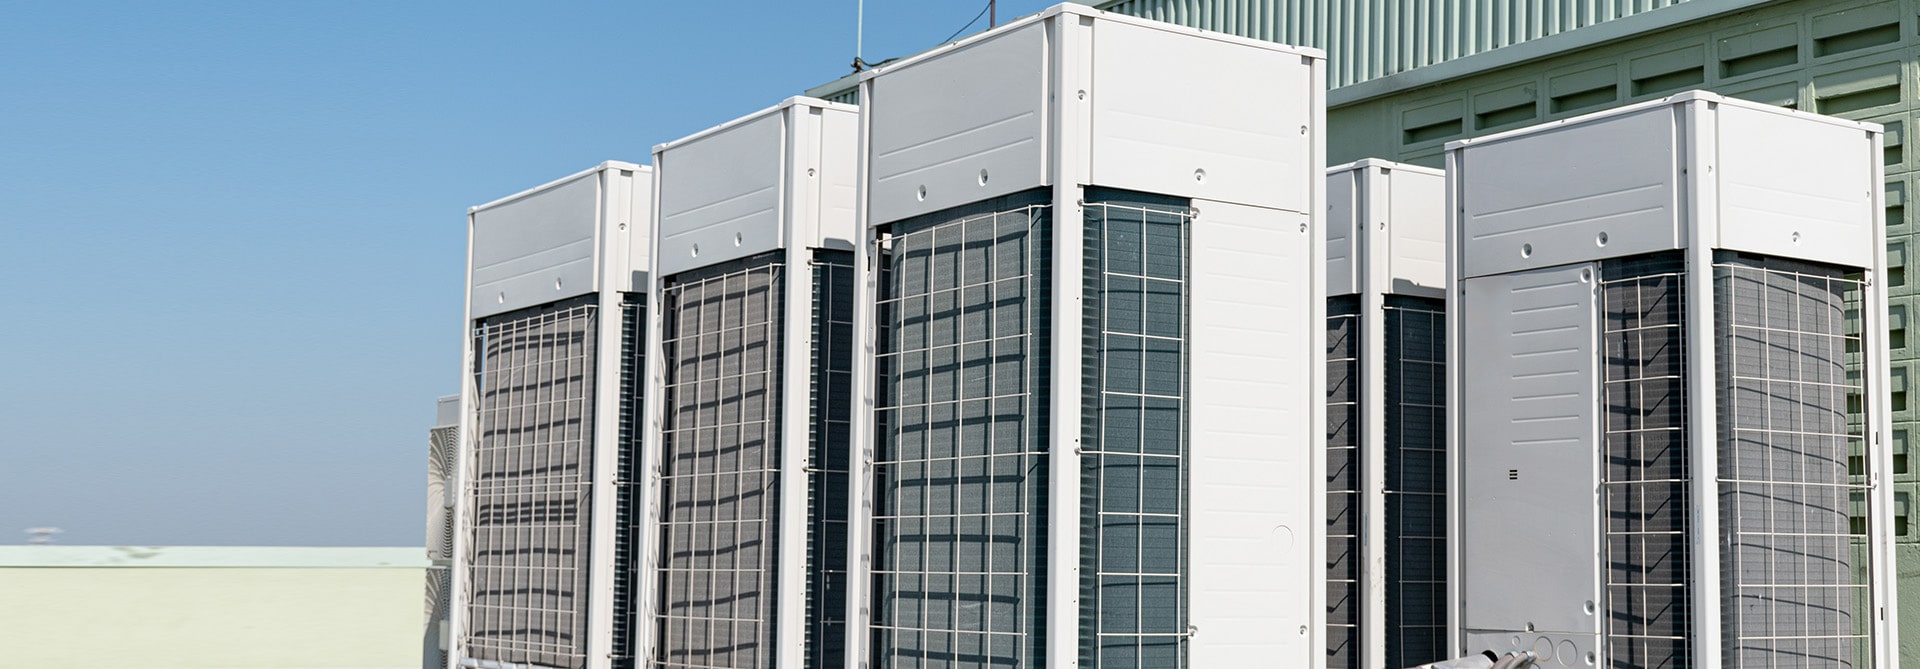 VRV and VRF Air Conditioning Systems: What Are the Differences